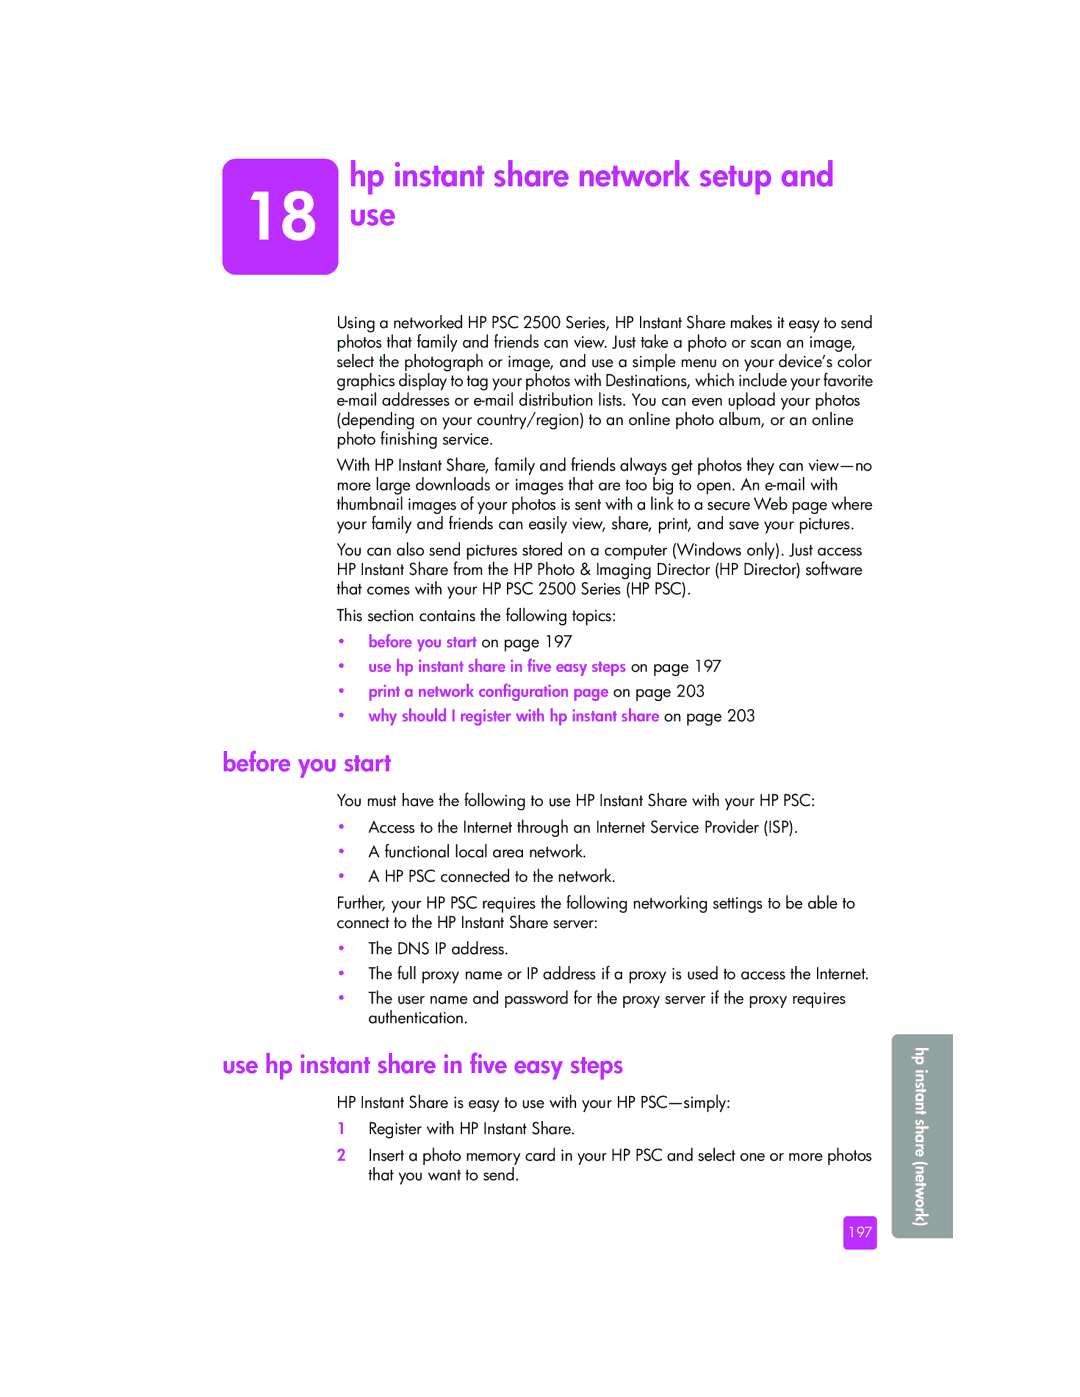 HP 2510xi manual Hp instant share network setup, Before you start, Use hp instant share in five easy steps, 197 